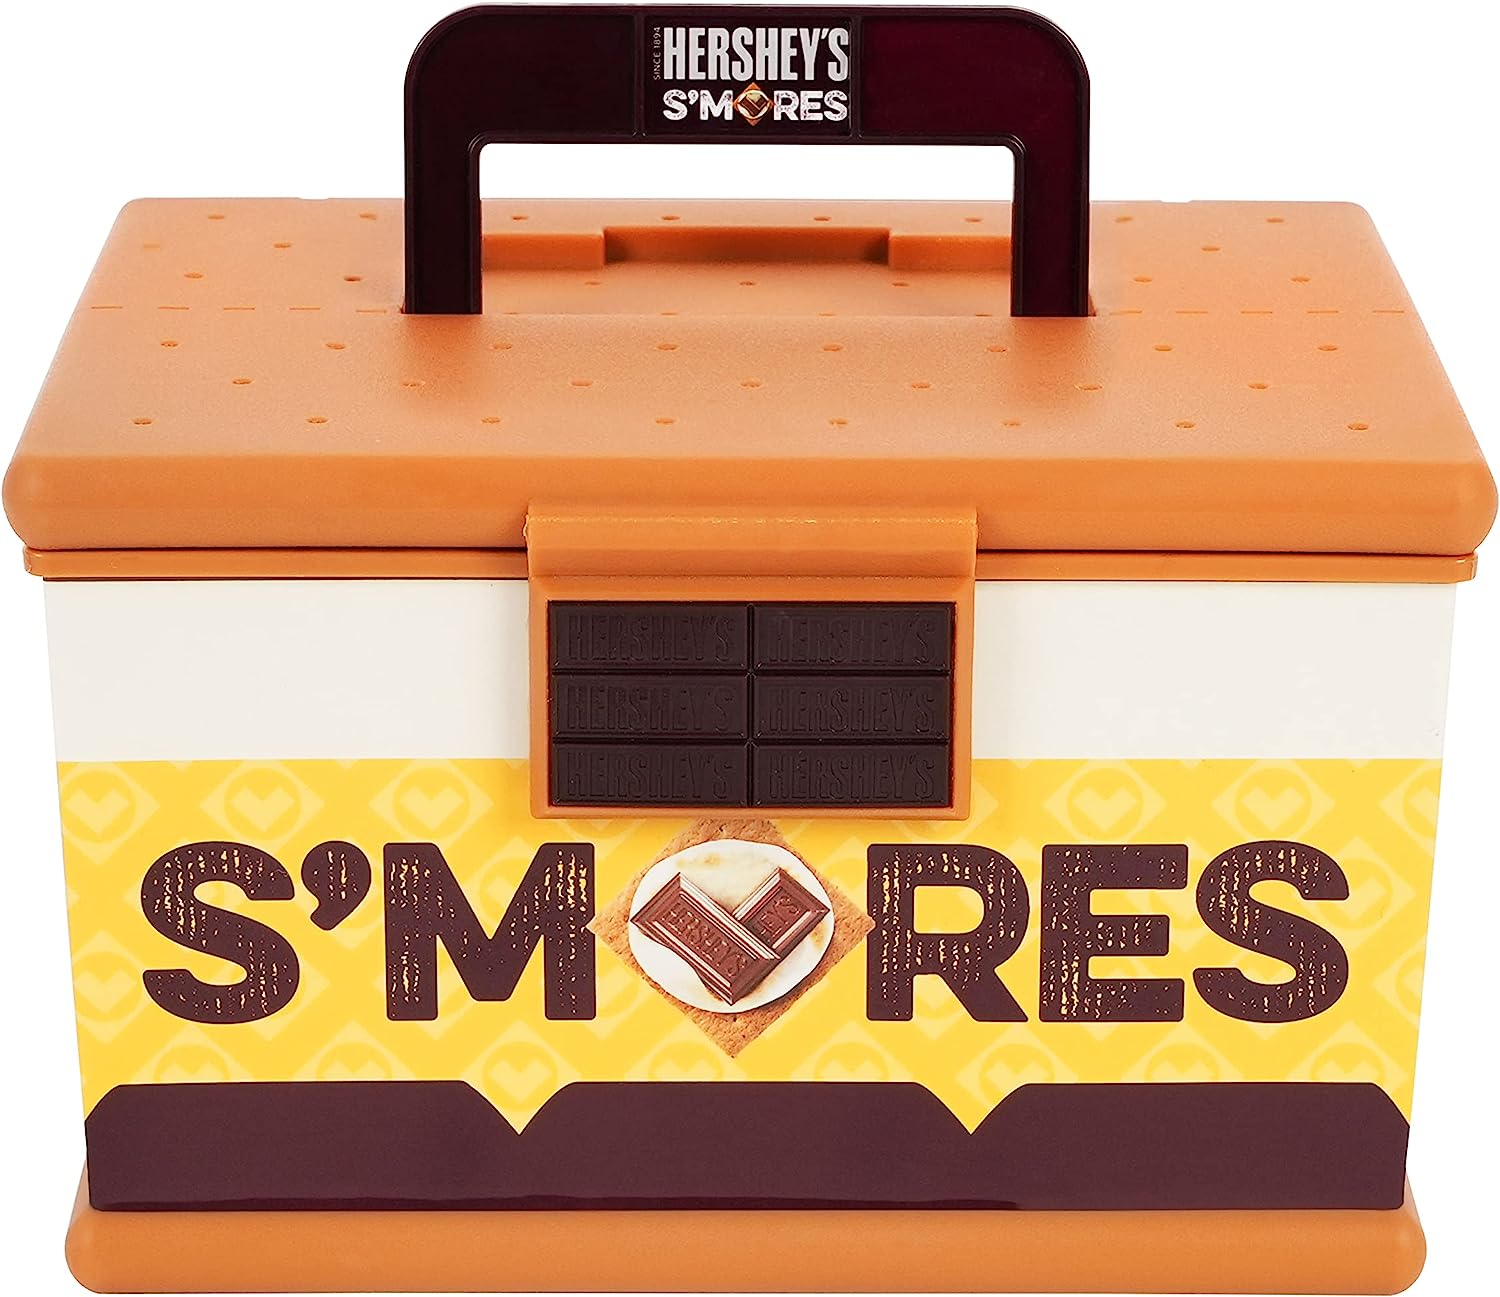 Mr. Bar-B-Q - Hershey's Deluxe S'mores Caddy